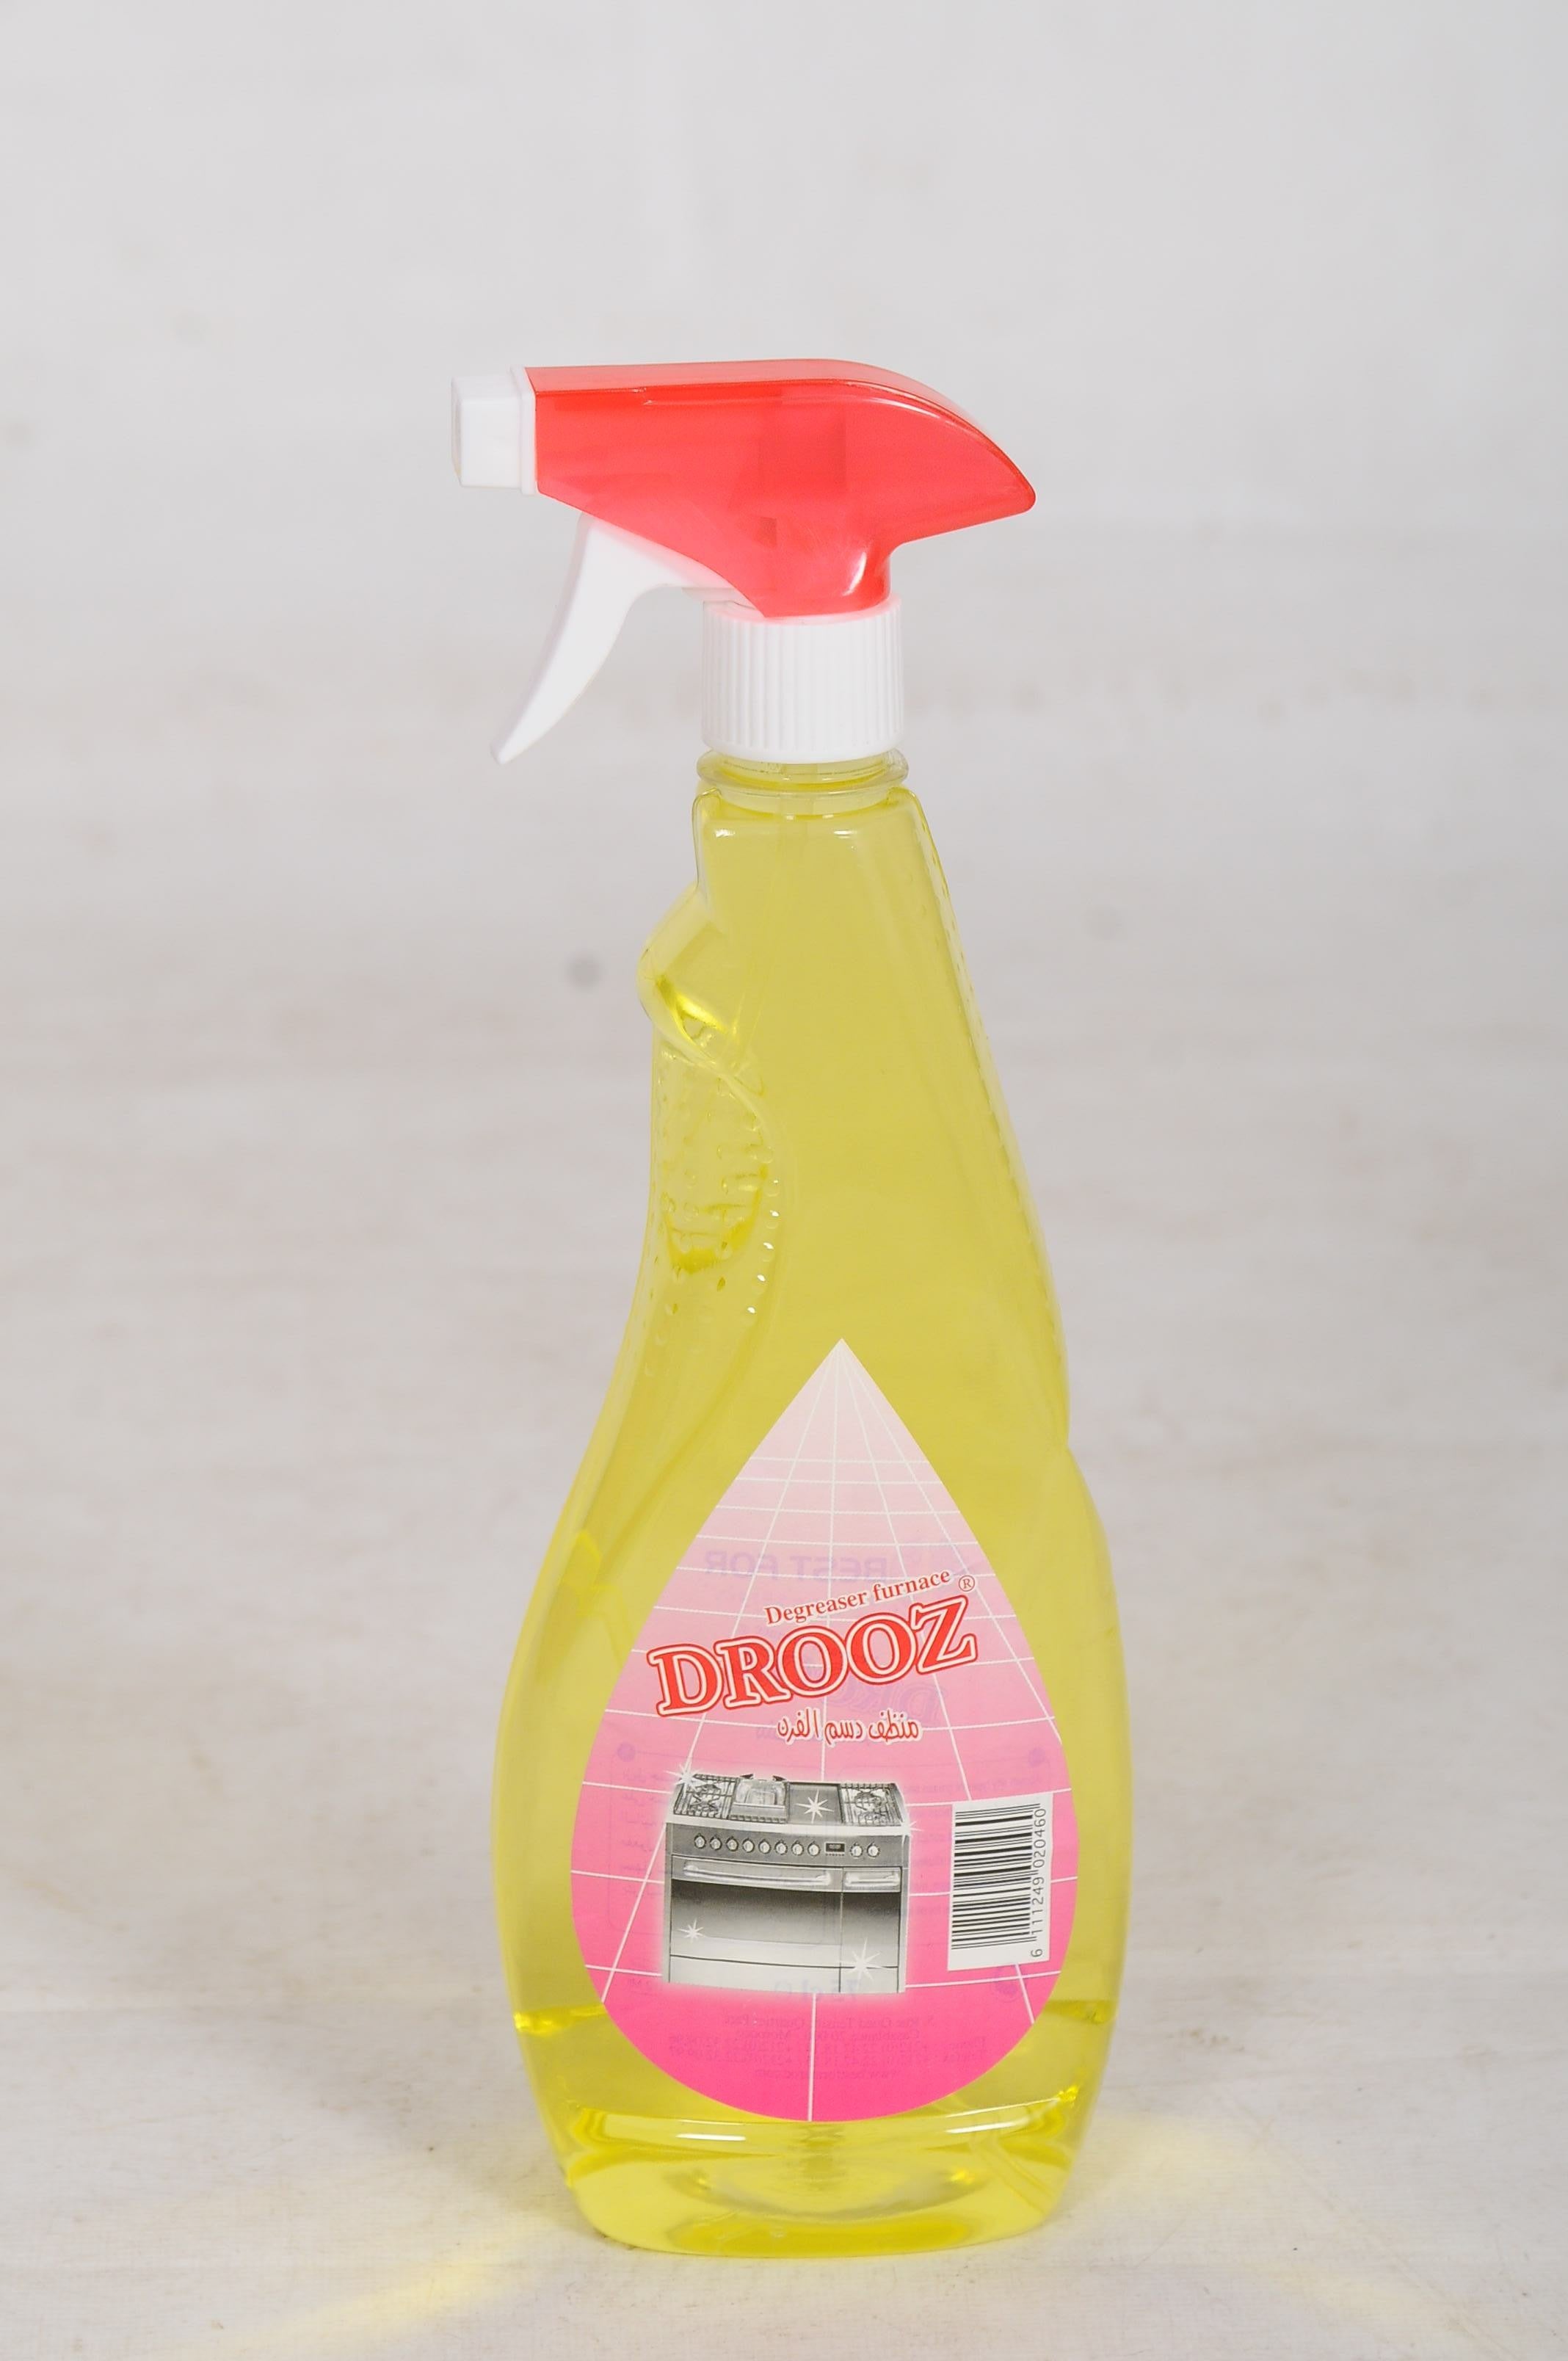 Drooz oven degreaser 750ml